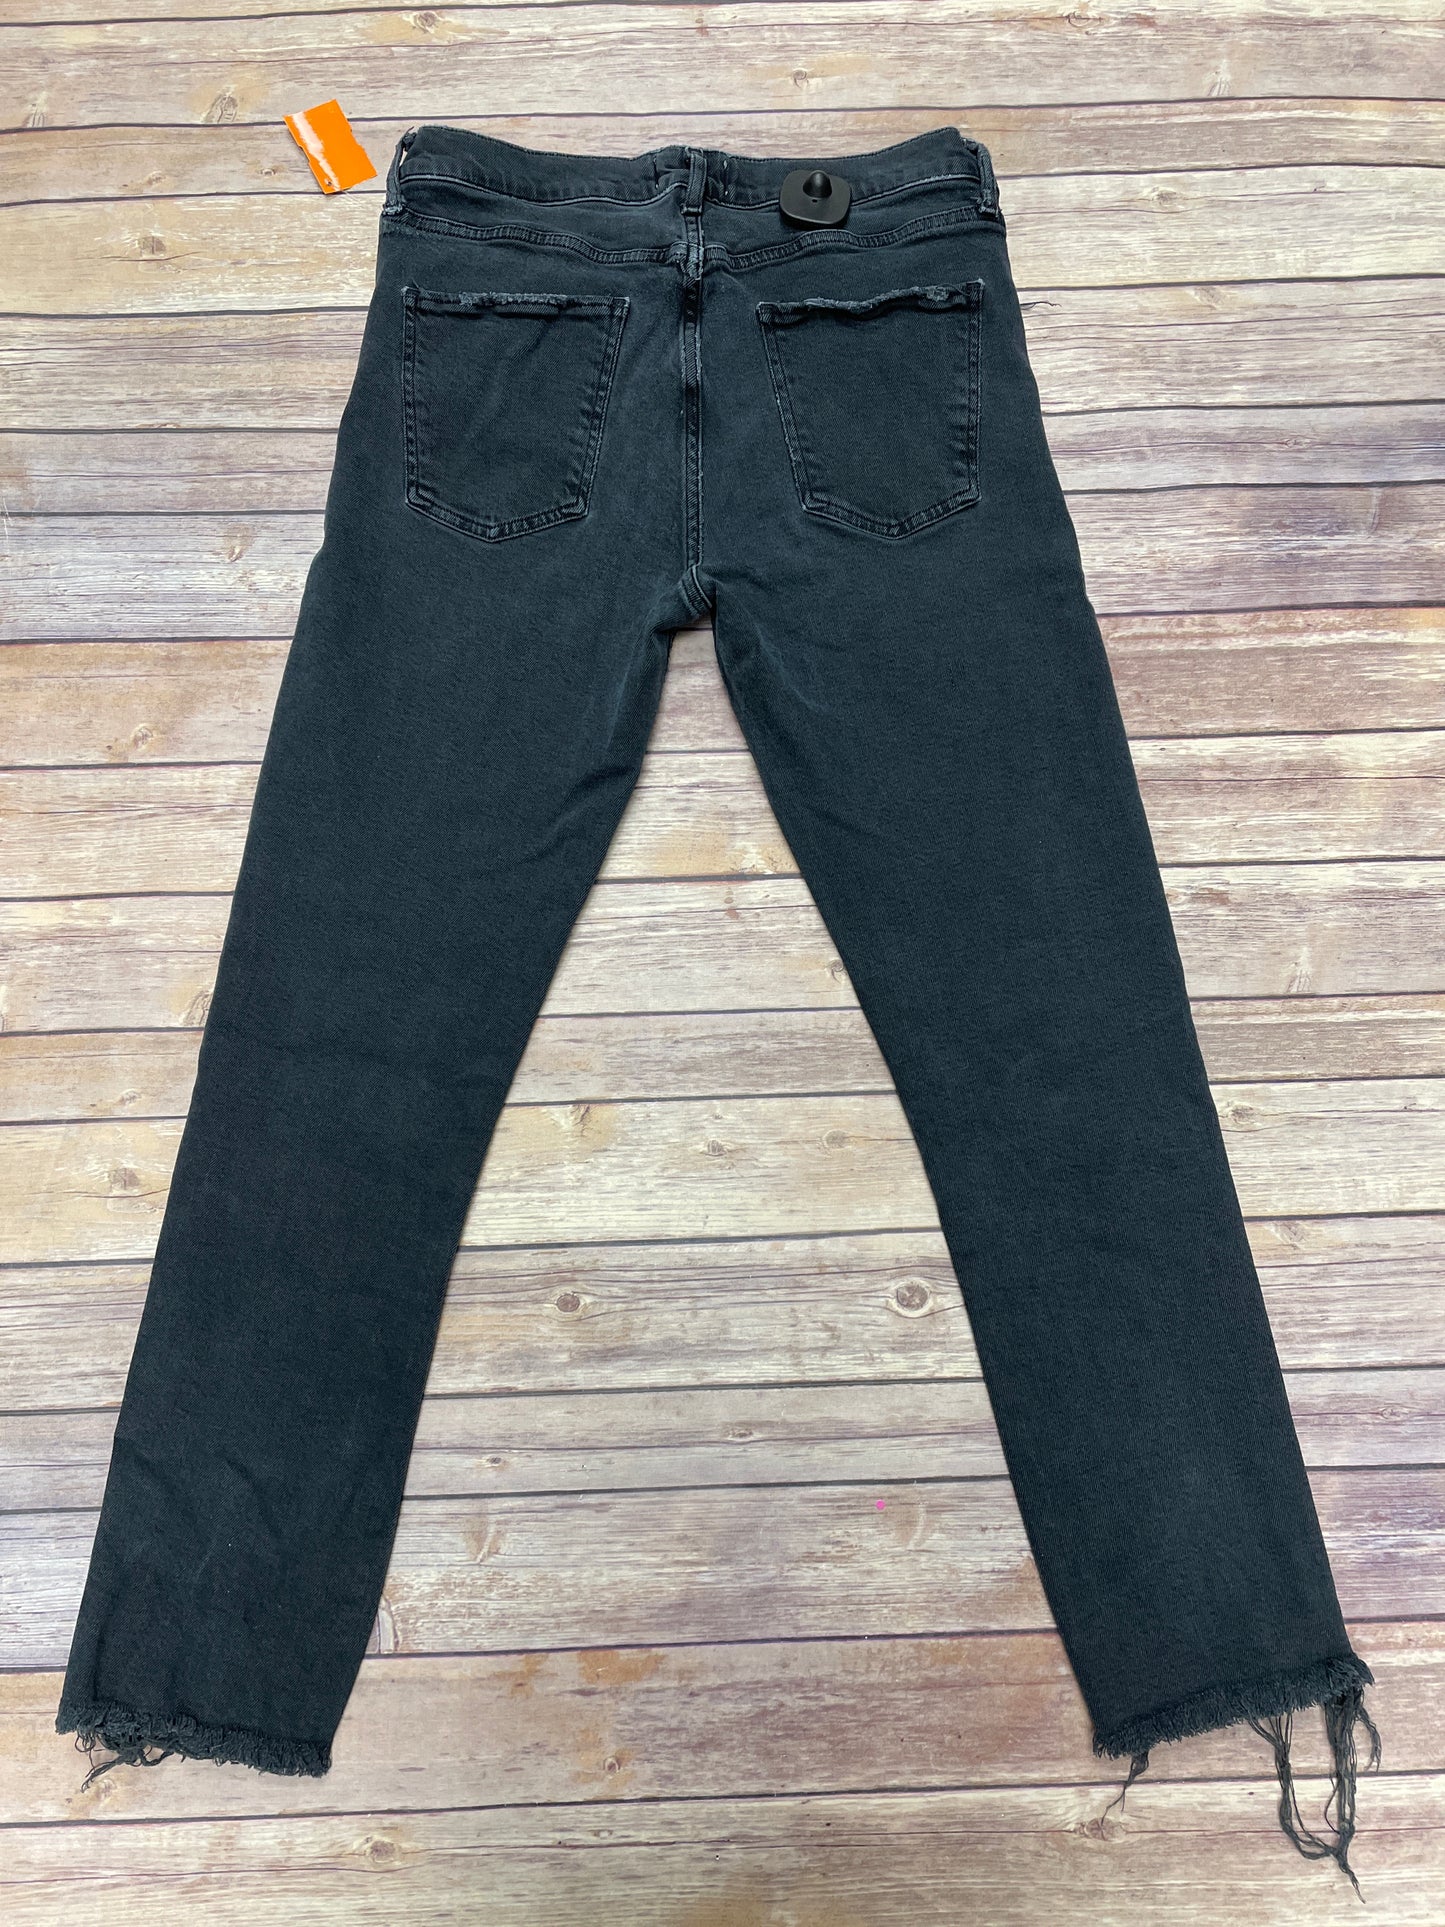 Jeans Skinny By Agolde  Size: 6